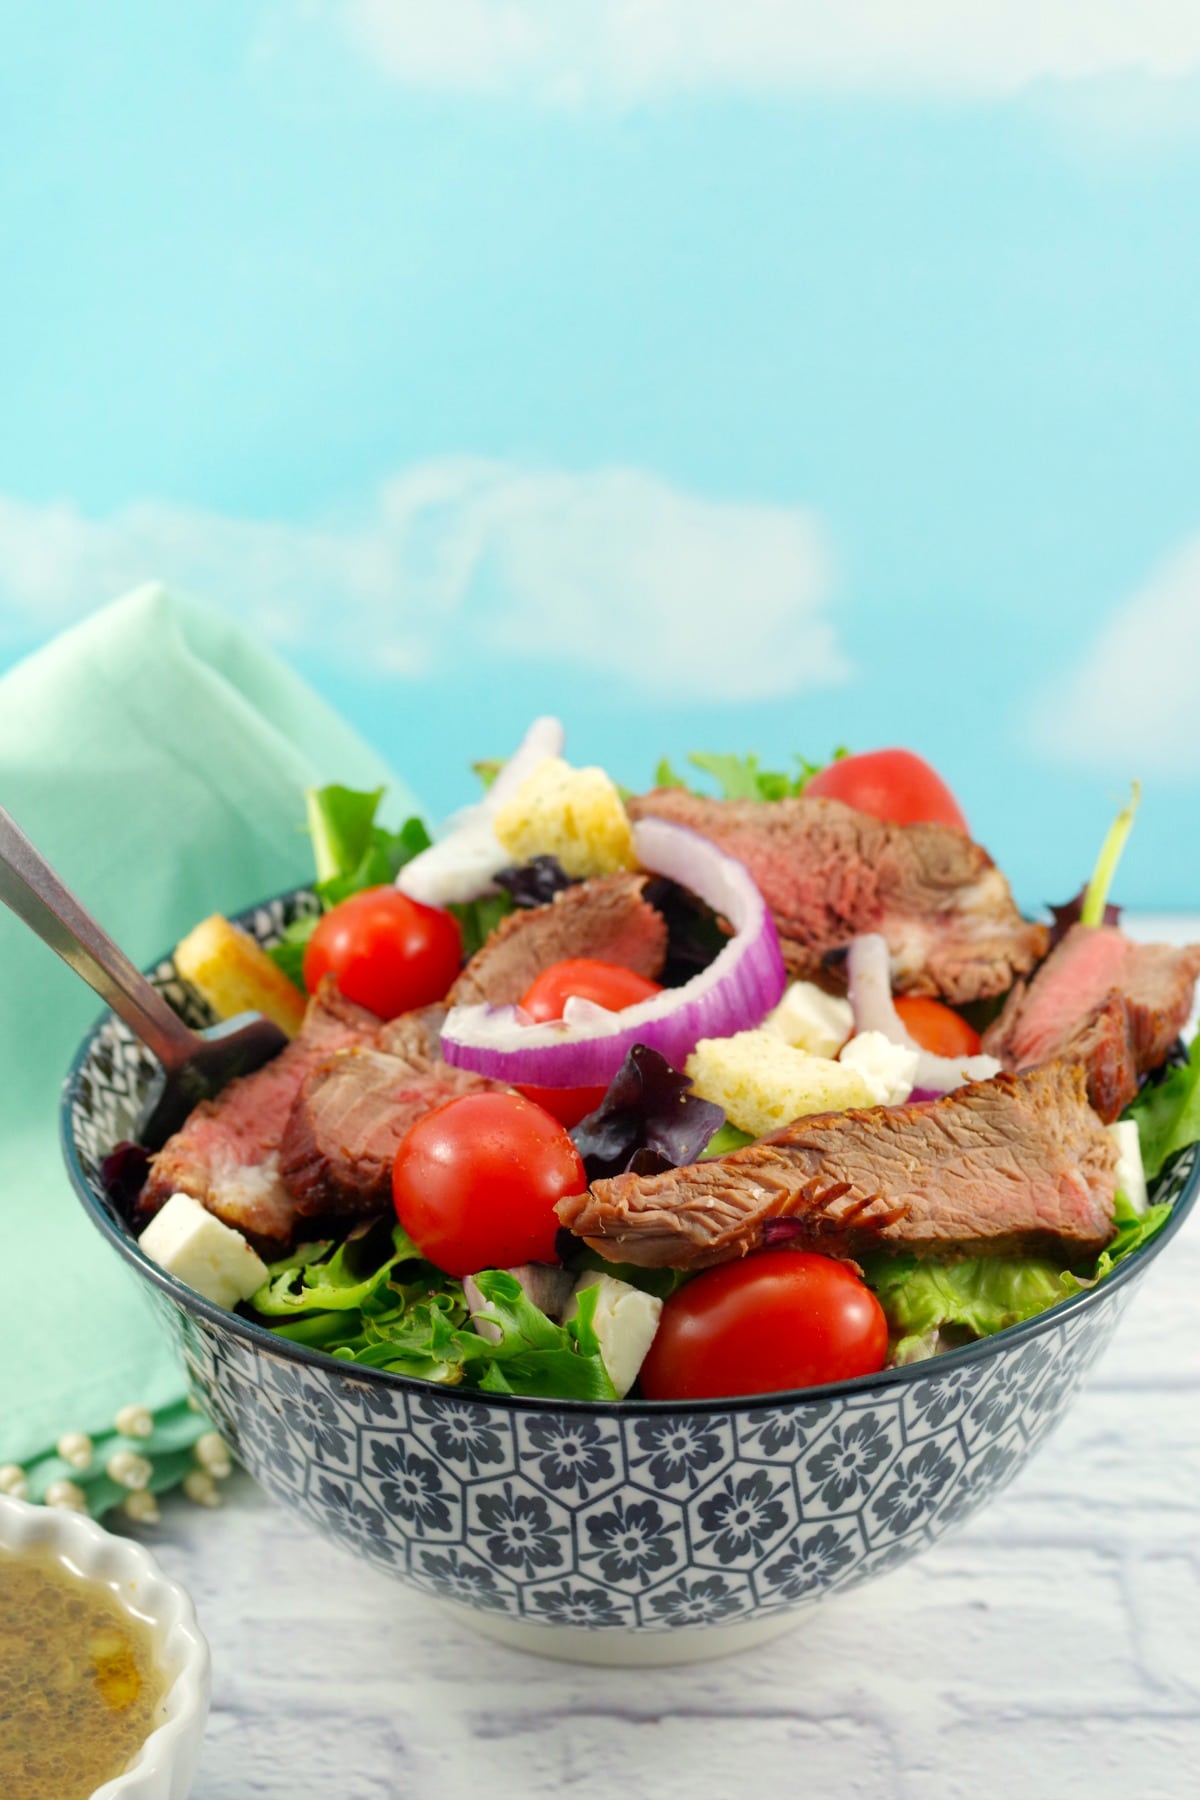 Grilled Steak Salad with feta and clamato dressing - weight watchers friendly